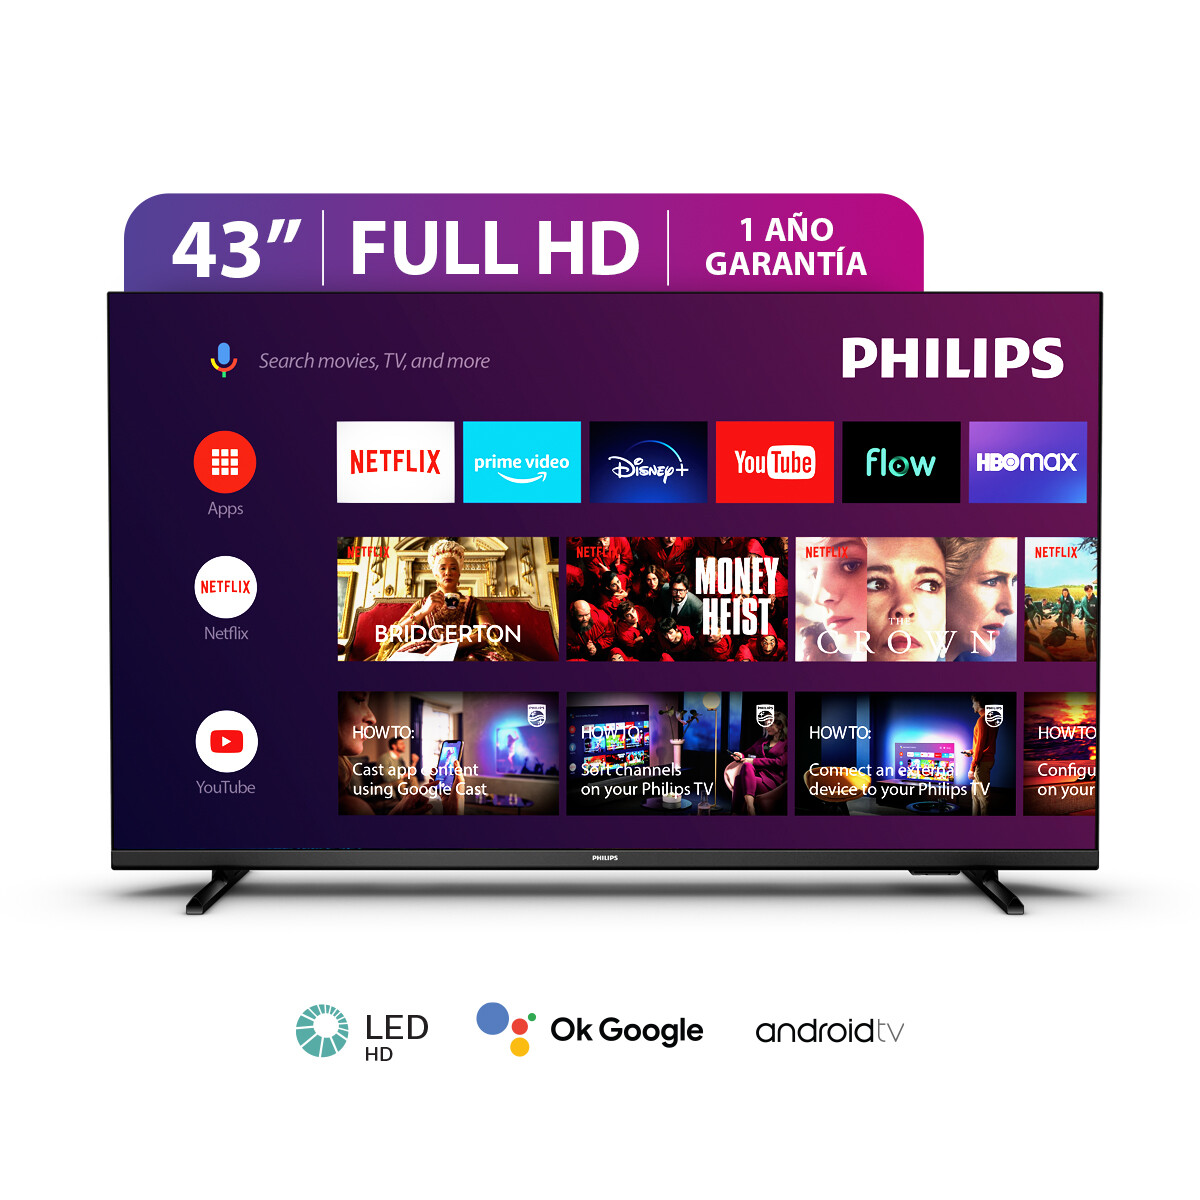 Smart Tv 43" Philips Android FULL HD 